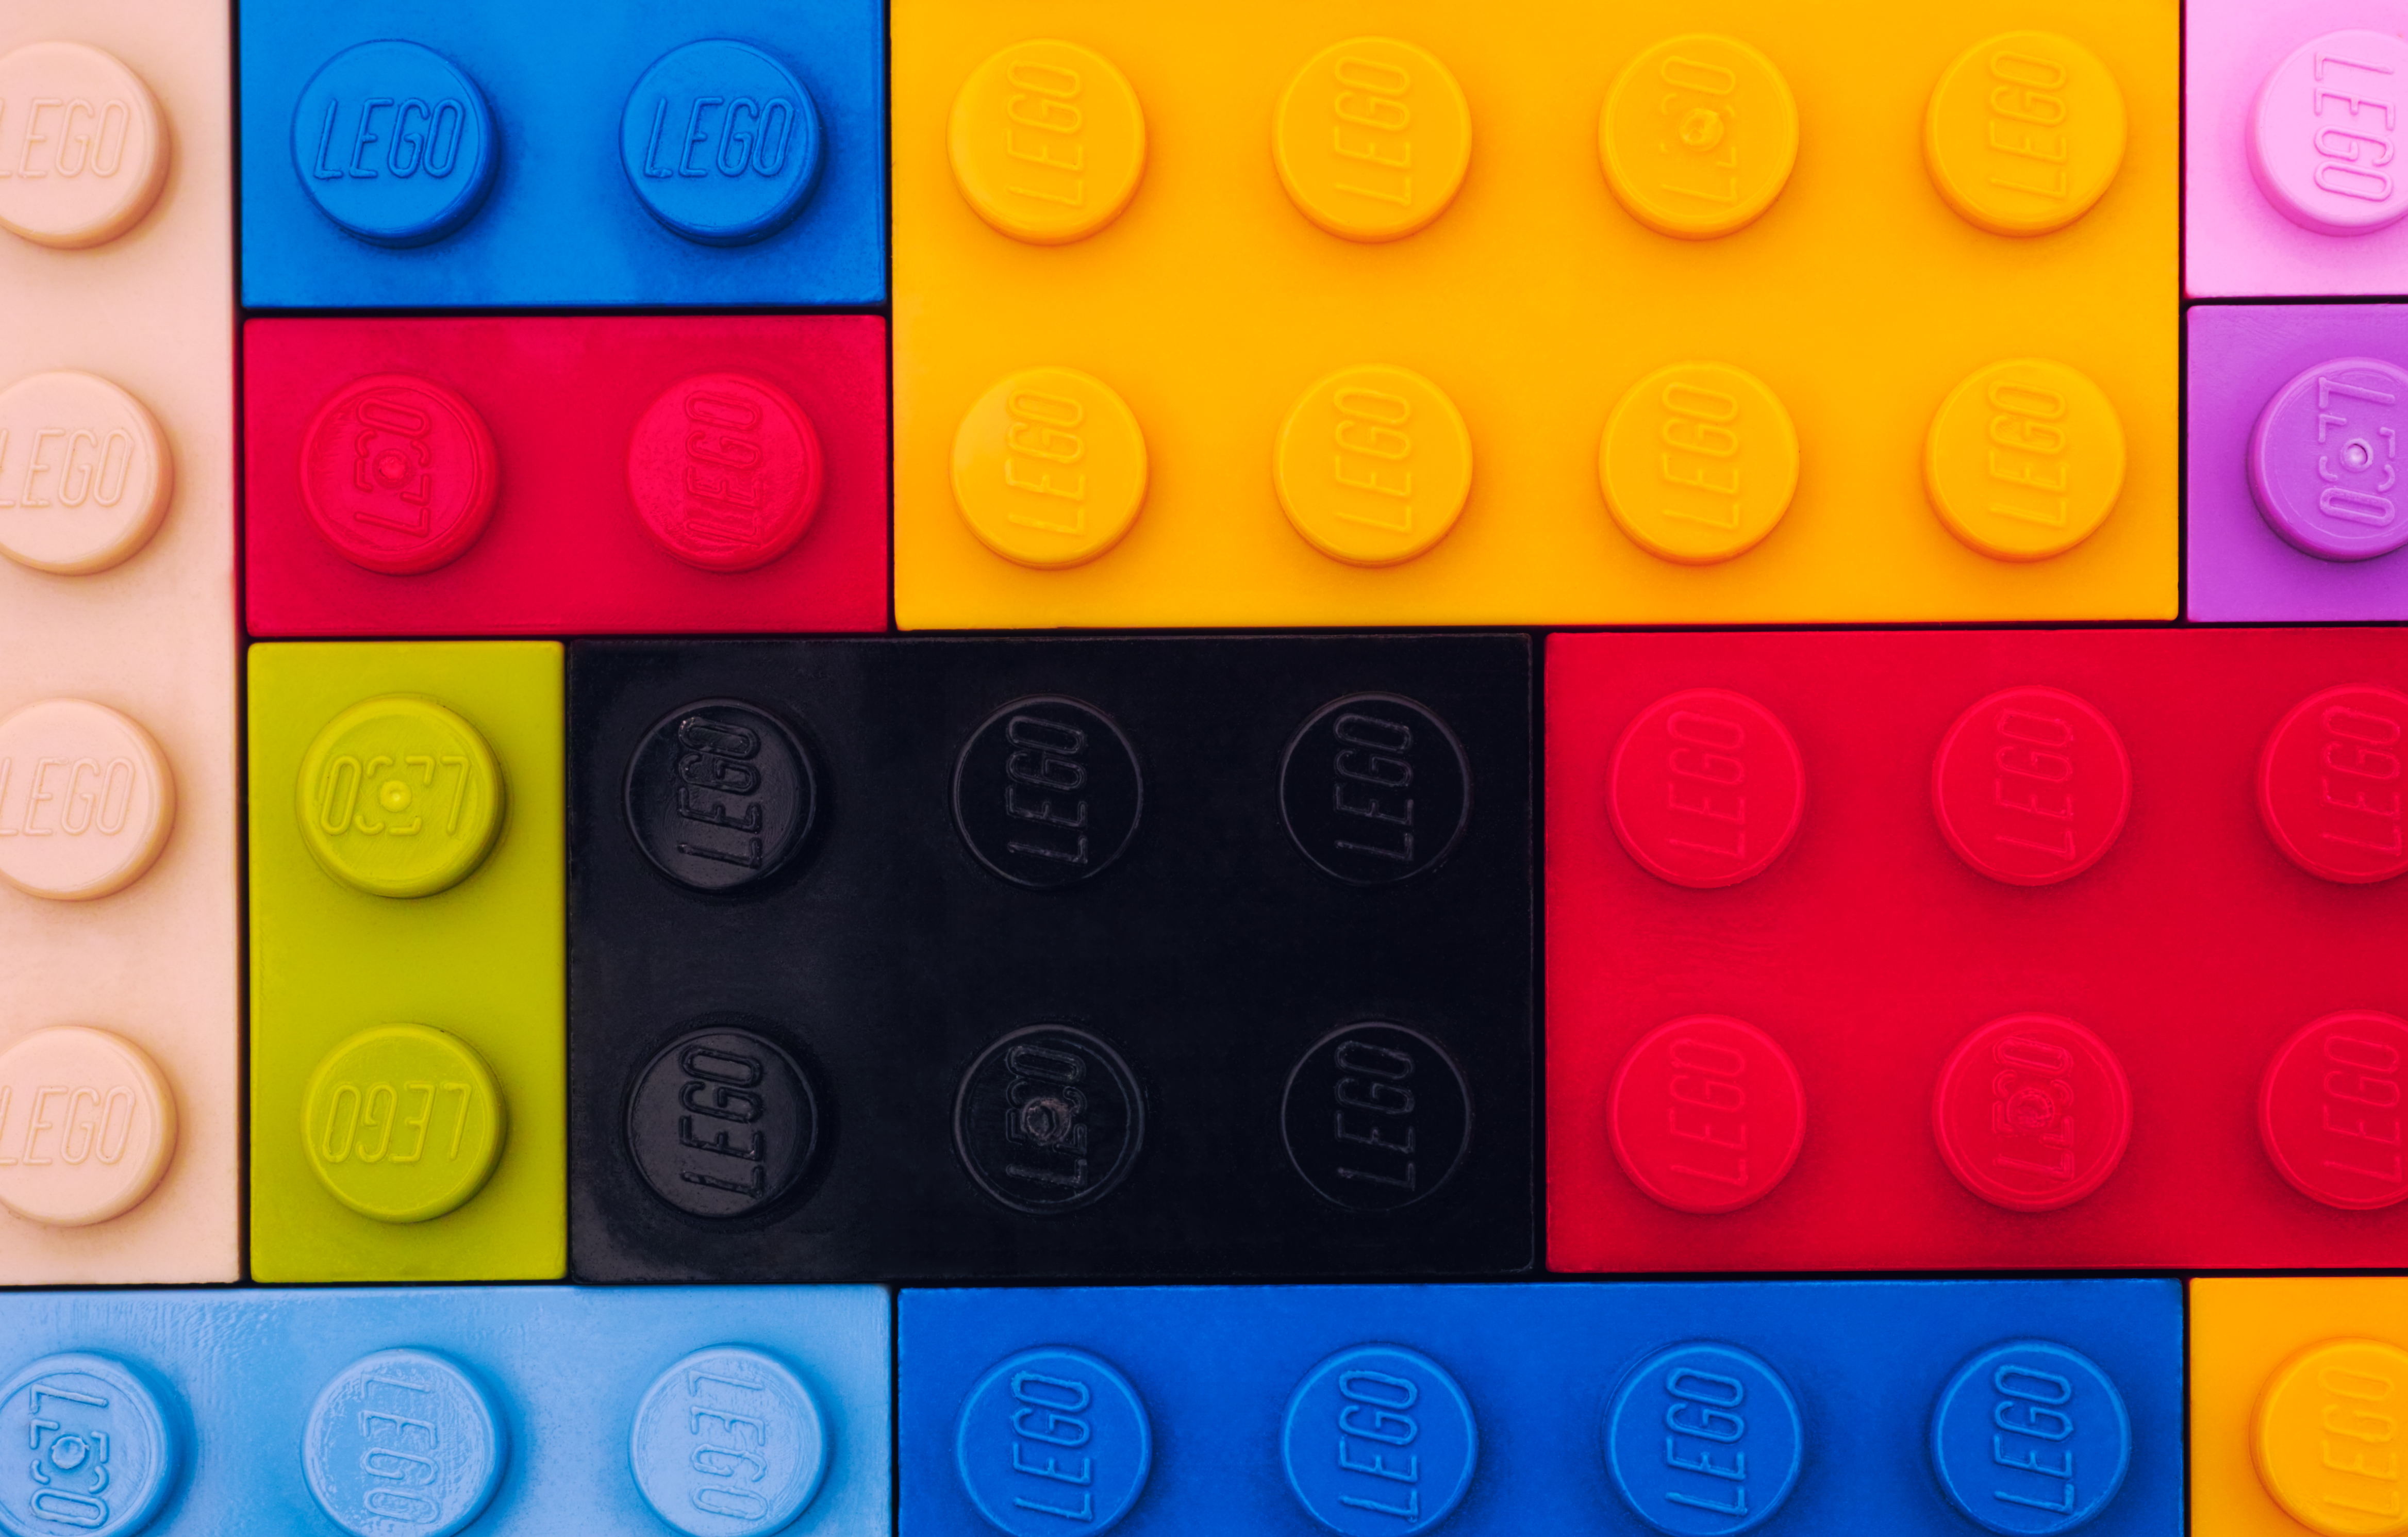 Co-Creation: The Lego Story